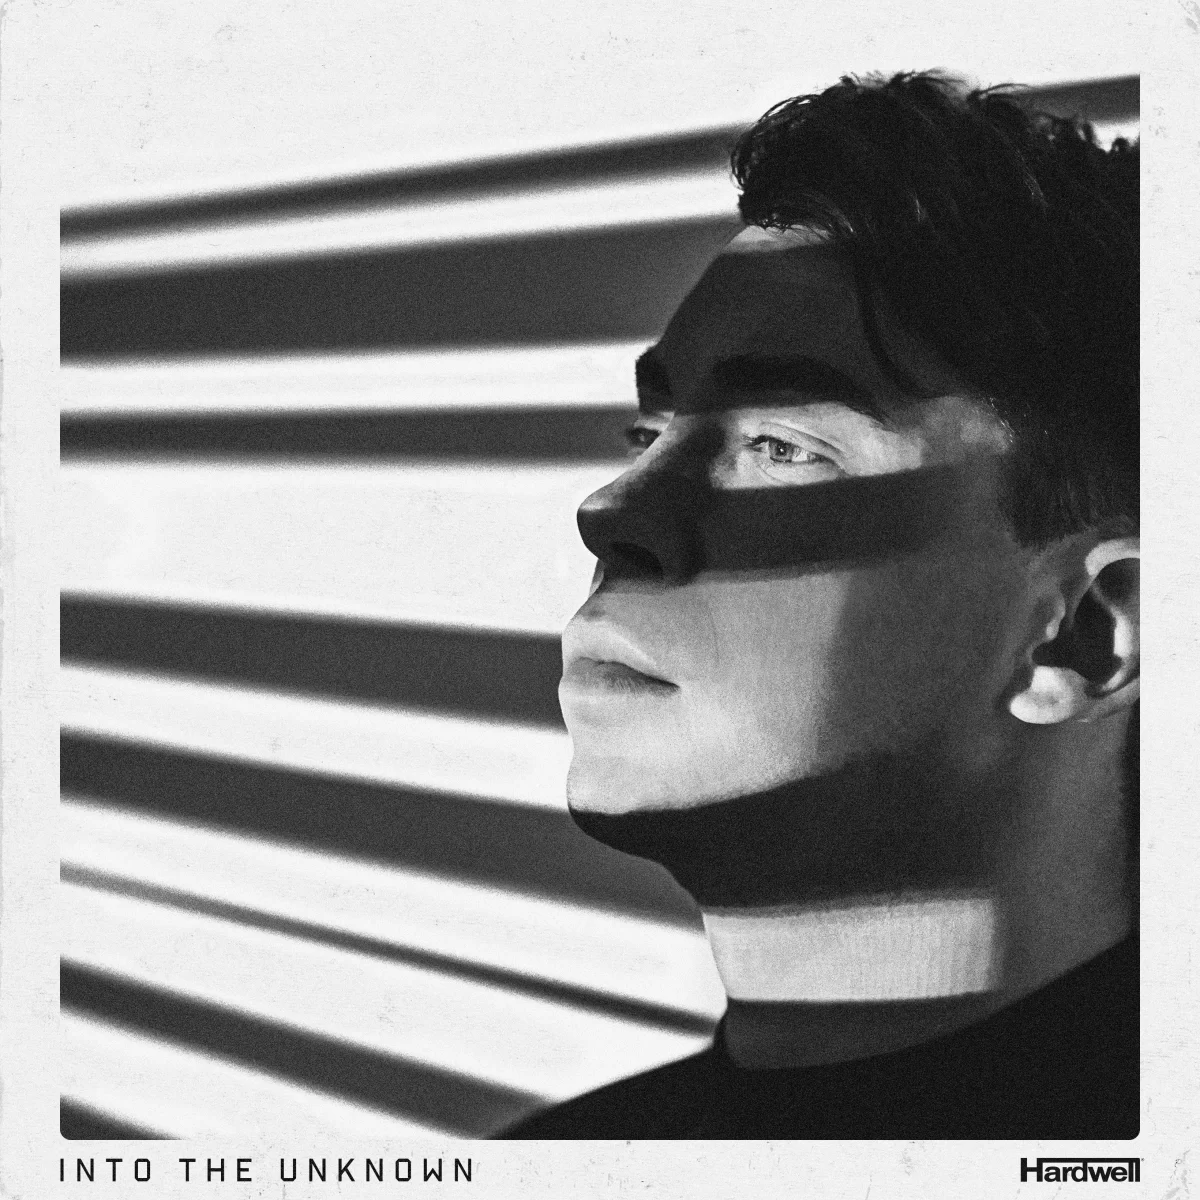 INTO THE UNKNOWN – Hardwell